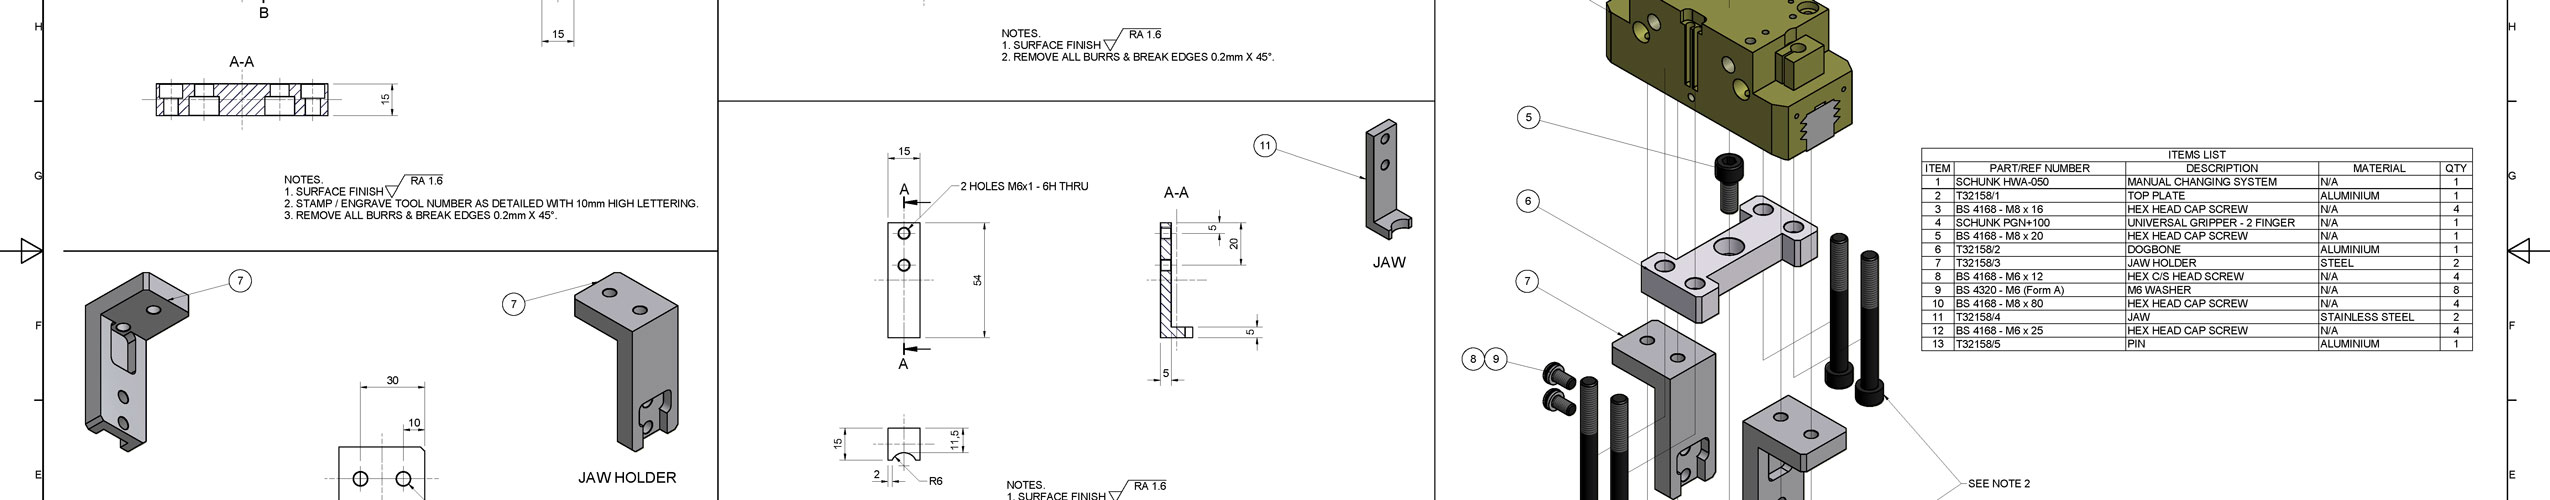 Jig and Fixture Engineering Drawing to BS8888 Standard